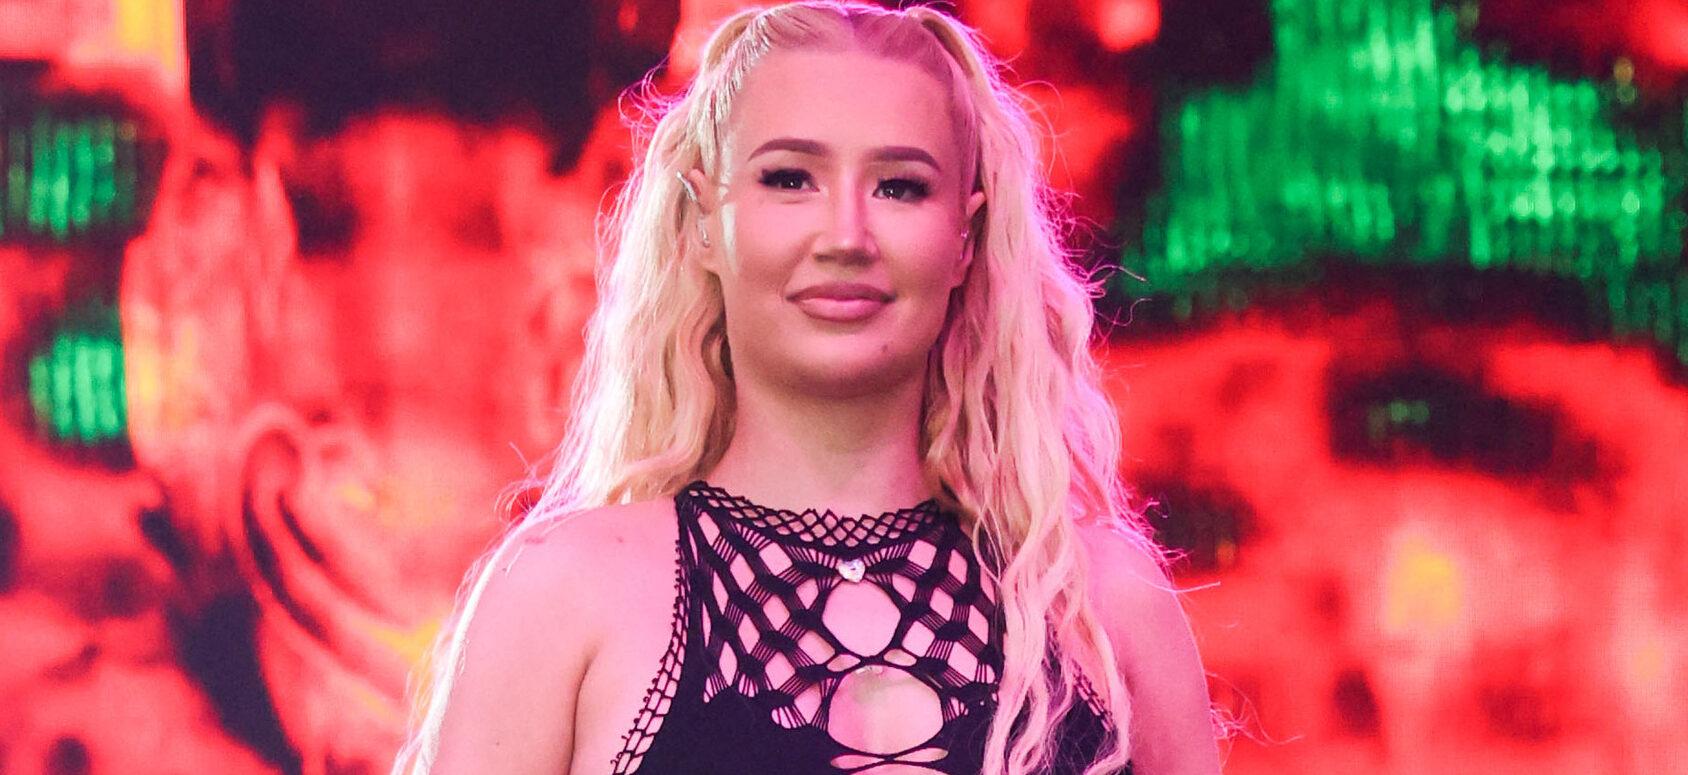 Iggy Azalea Fans Worried By Her Smoking In New Video: ‘You’re Already Smoking Hot’